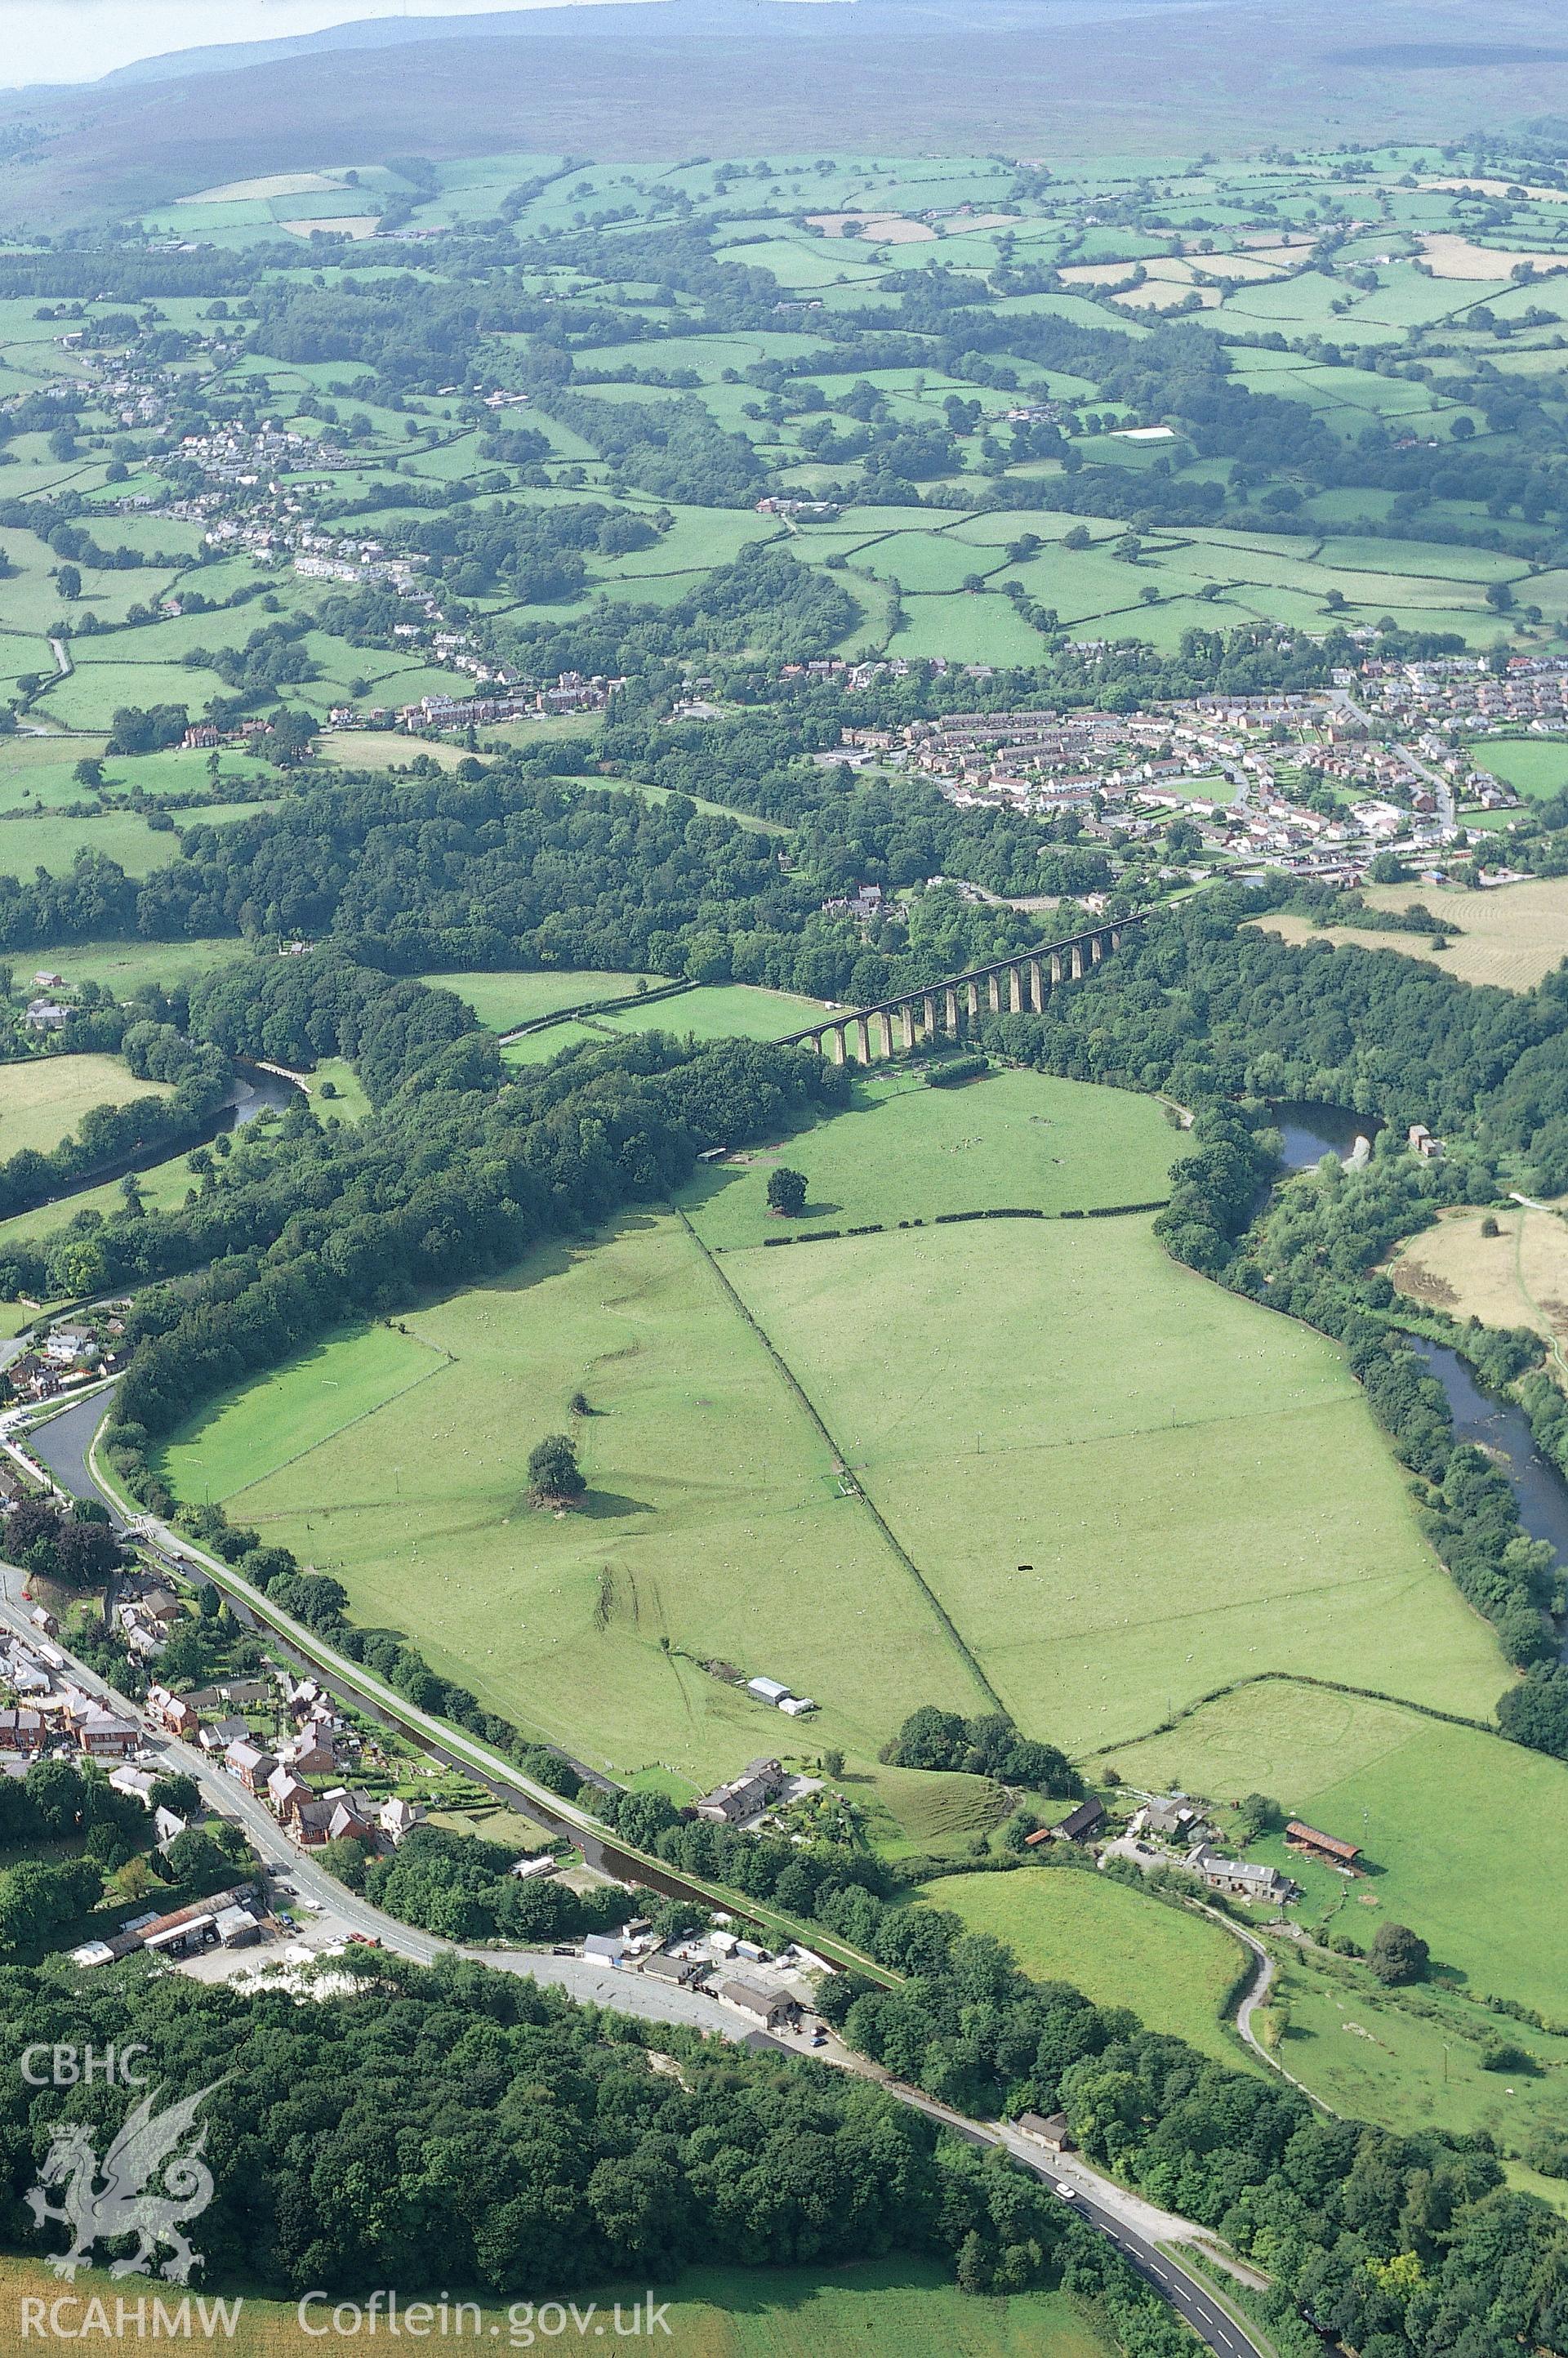 RCAHMW colour oblique aerial photograph of Pontcysyllte Aqueduct taken on 30/07/2004 by Toby Driver